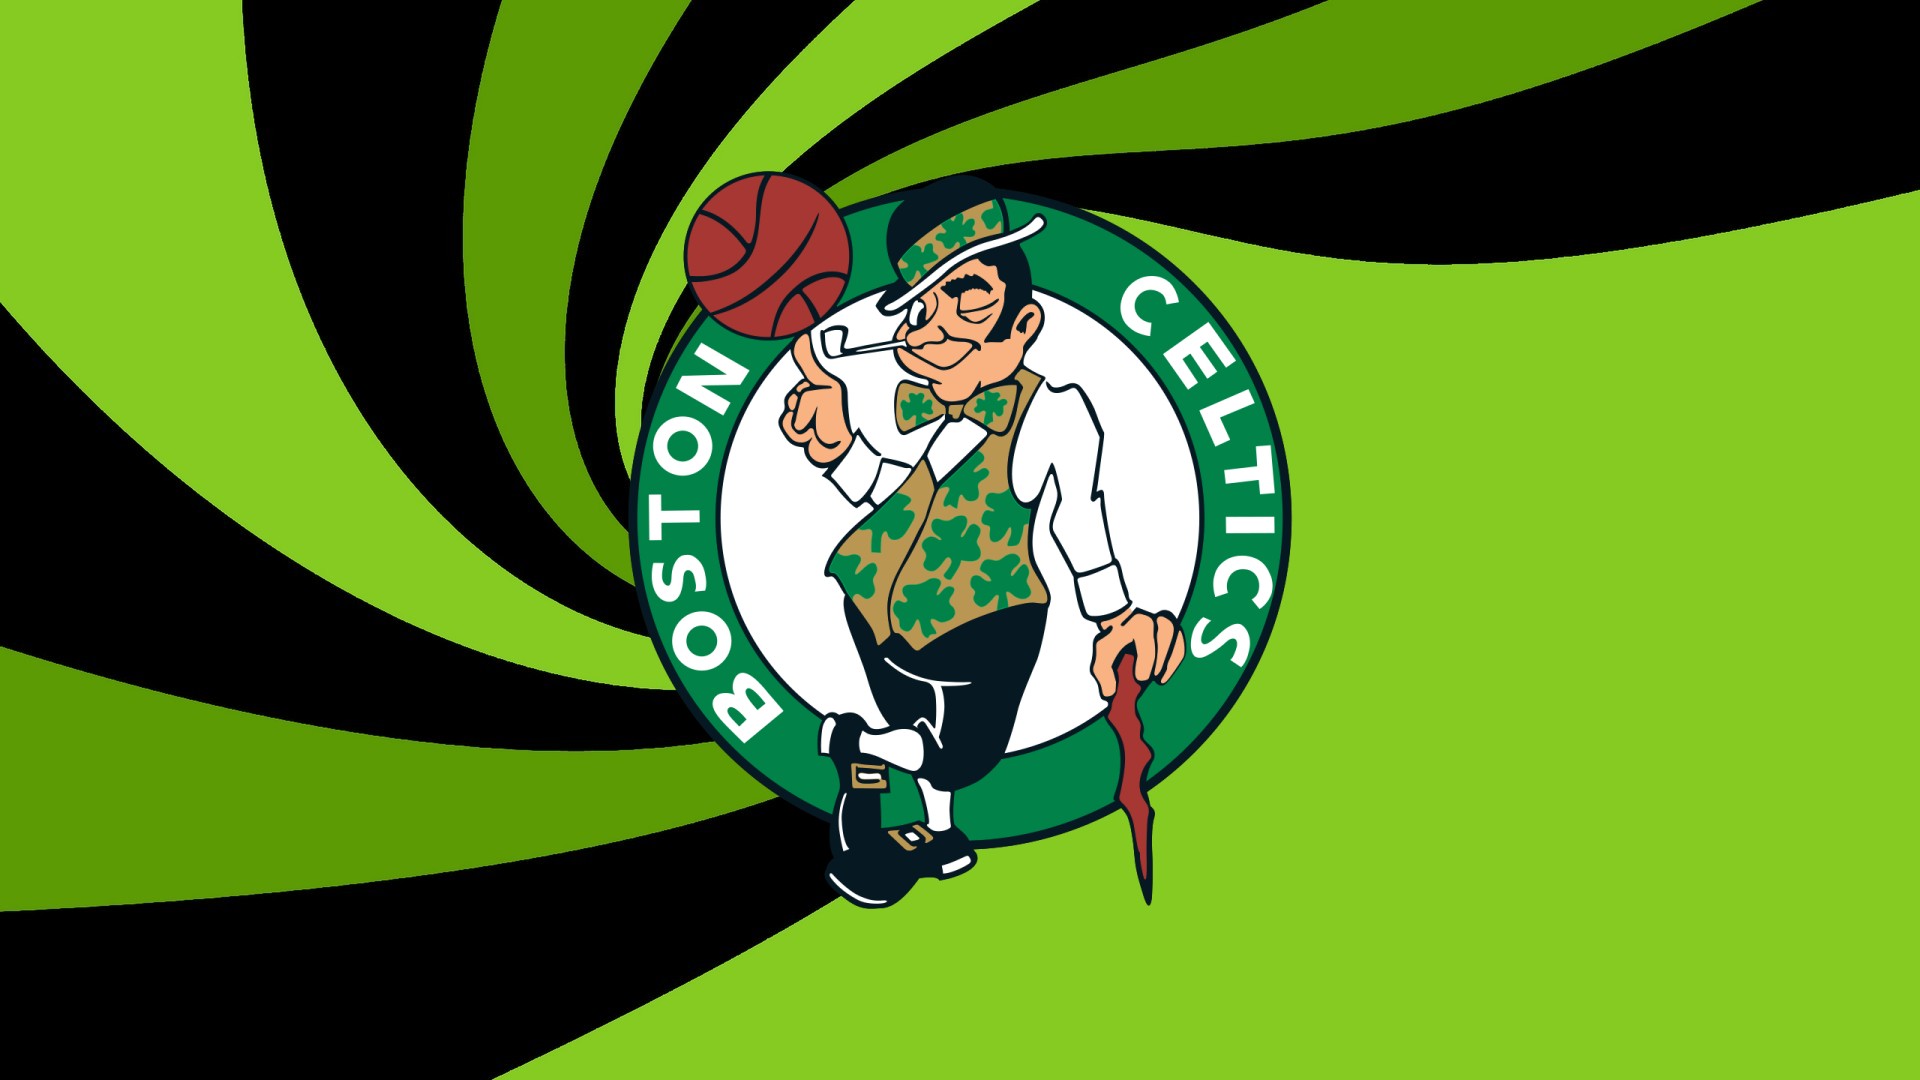 Boston Celtics Backgrounds HD with image dimensions 1920x1080 pixel. You can make this wallpaper for your Desktop Computer Backgrounds, Windows or Mac Screensavers, iPhone Lock screen, Tablet or Android and another Mobile Phone device